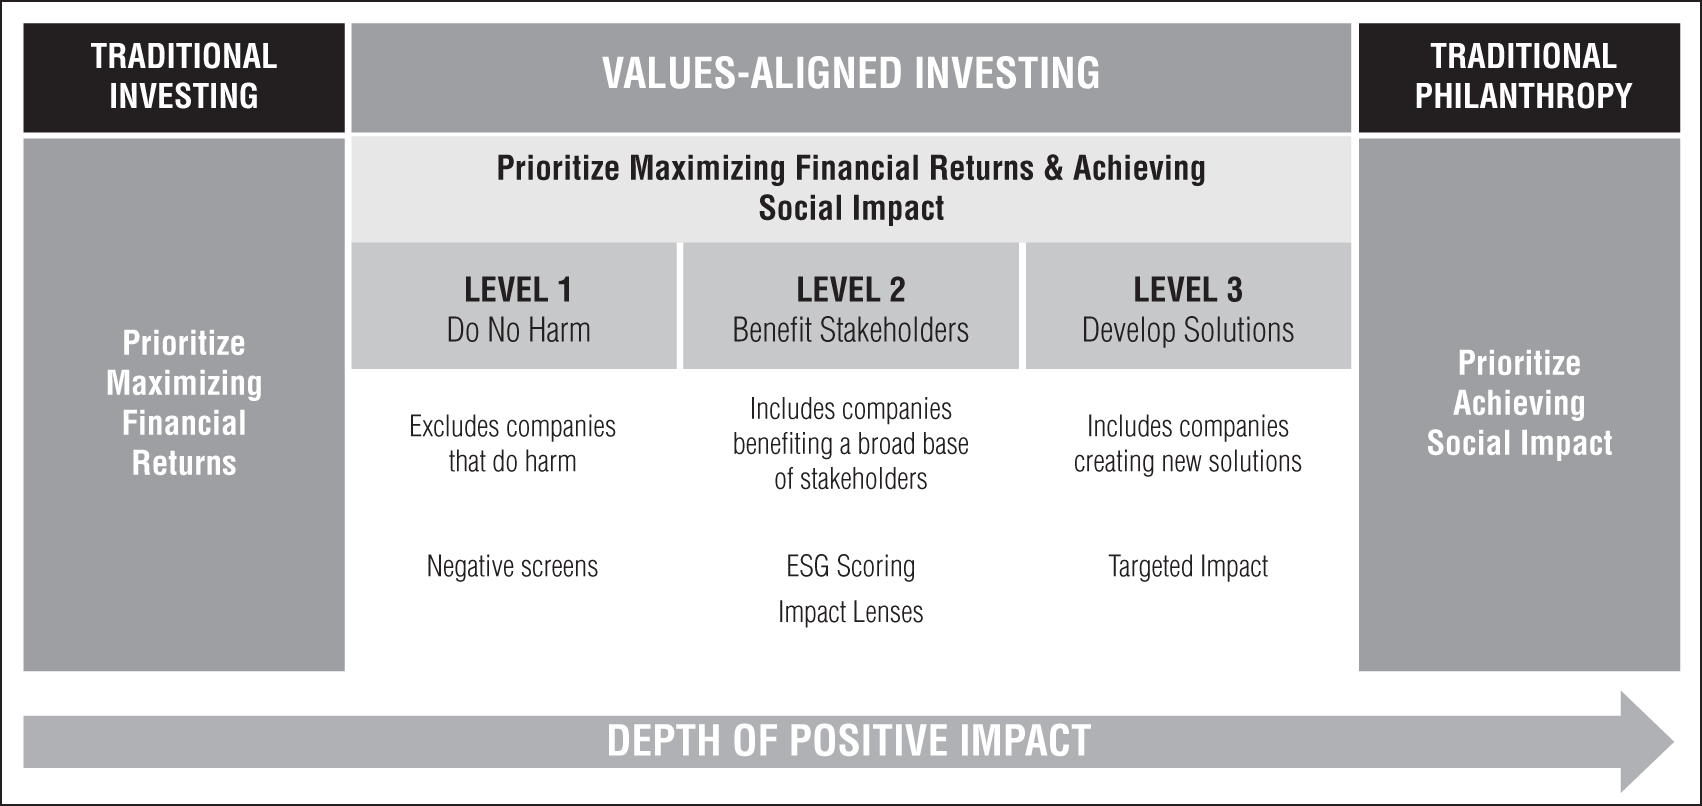 Snapshot of the Values-Aligned Investing Landscape.